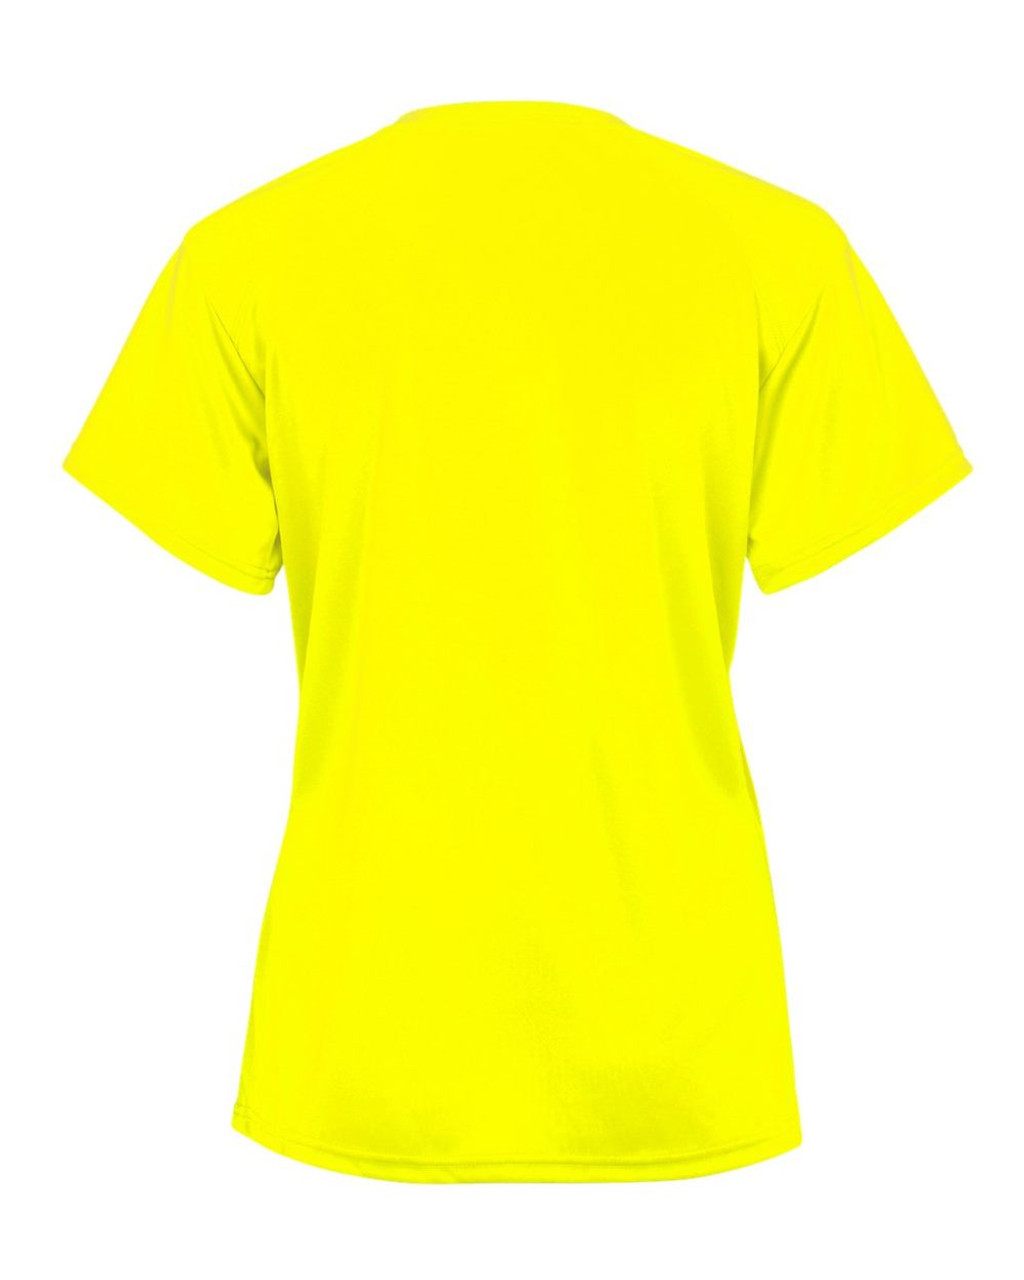 Safety Yellow